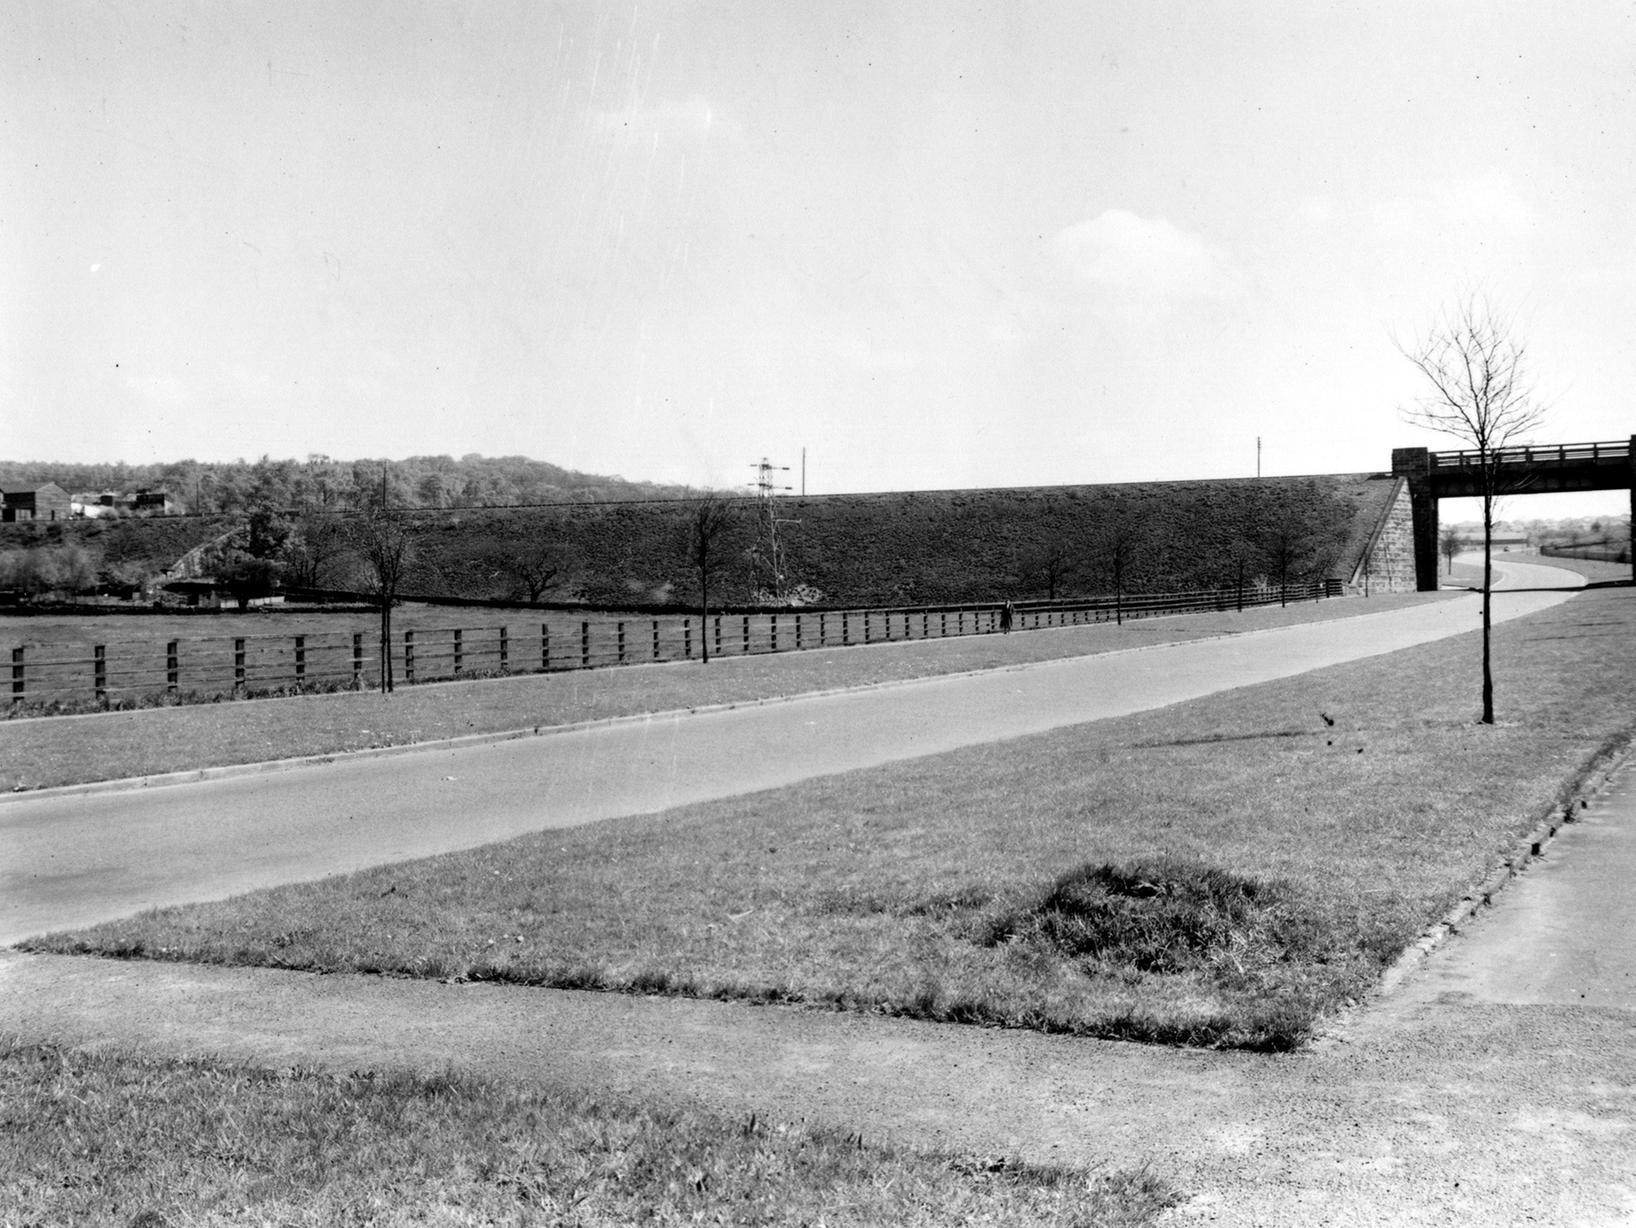 The L.N.E.R. Railway Bridge over the Horsforth Ring Road between Horsforth and West Park, looking north-east. A tree is to the right, an electricity pylon is in the centre and a signal box and commercial buildings are to the left.